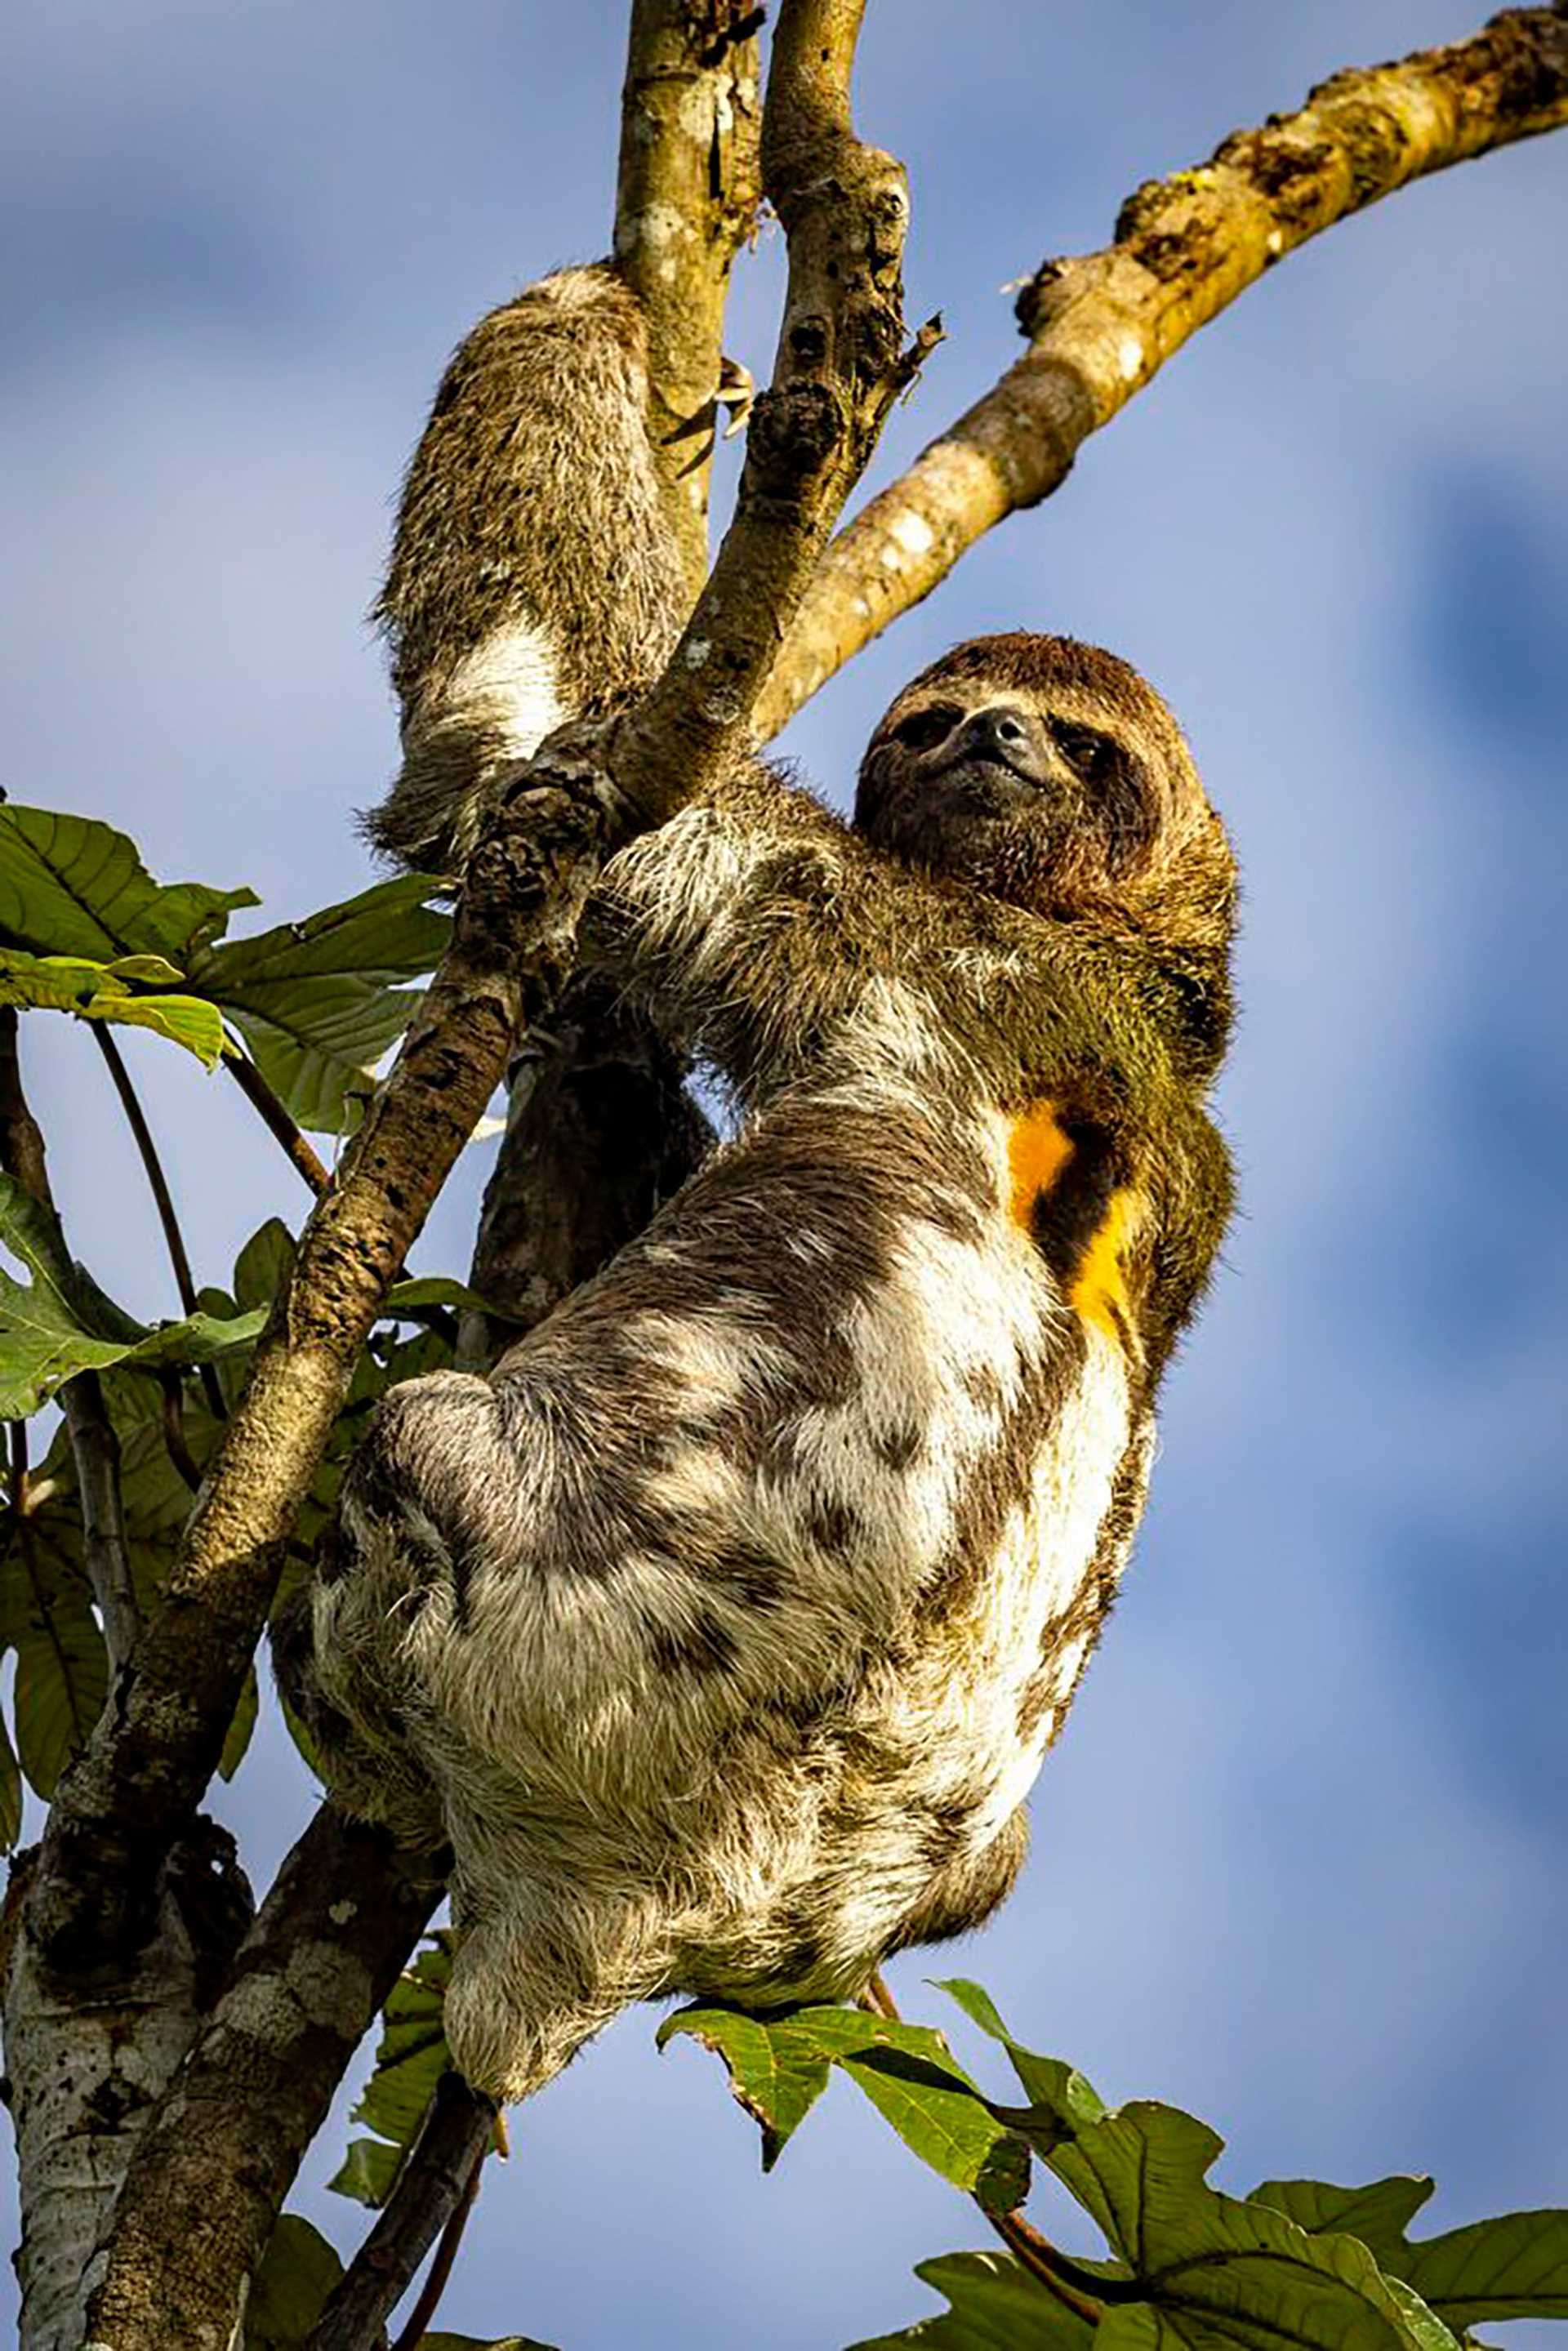 juvenile male sloth in a tree